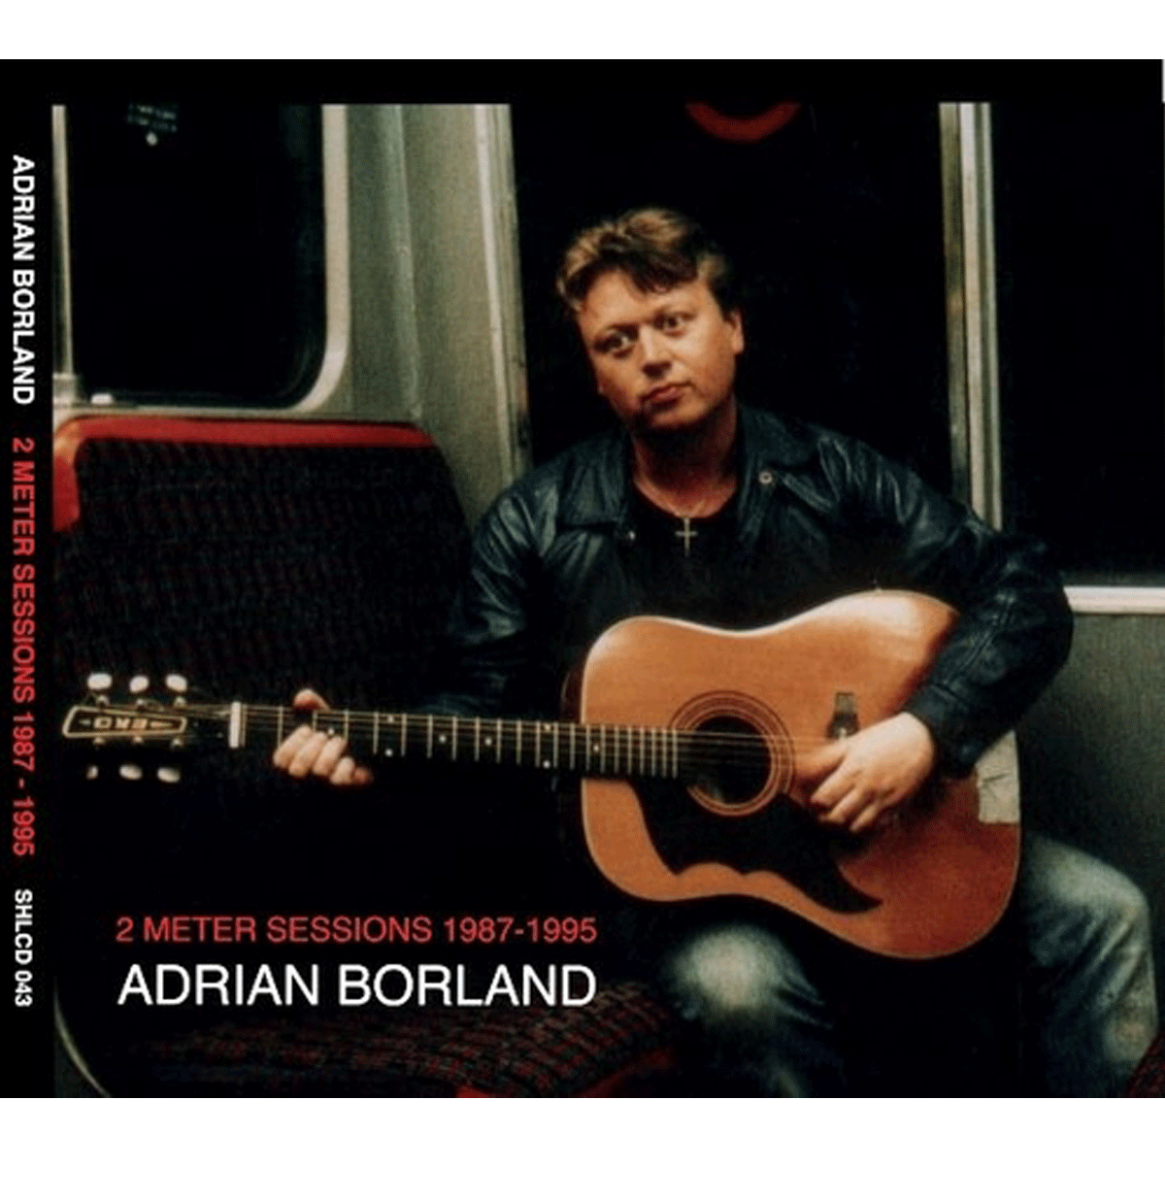 Adrian Borland - 2 Meter Sessions 1987-1995 ( Record Store Day Black Friday ) 2LP